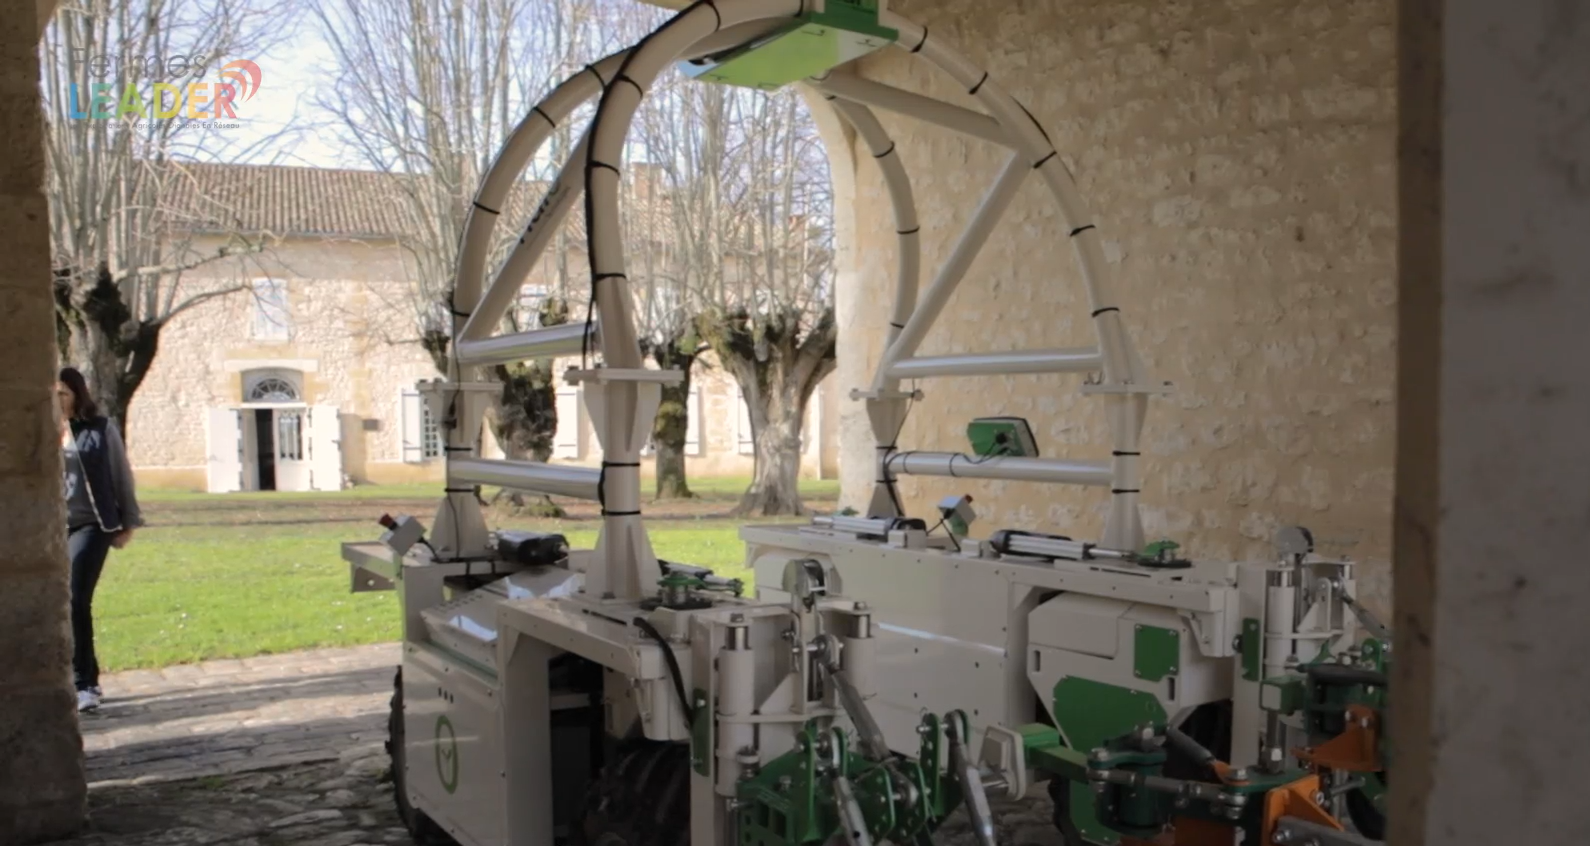 interview visite Univitis viticulture Naio robot agricole Dino Ted